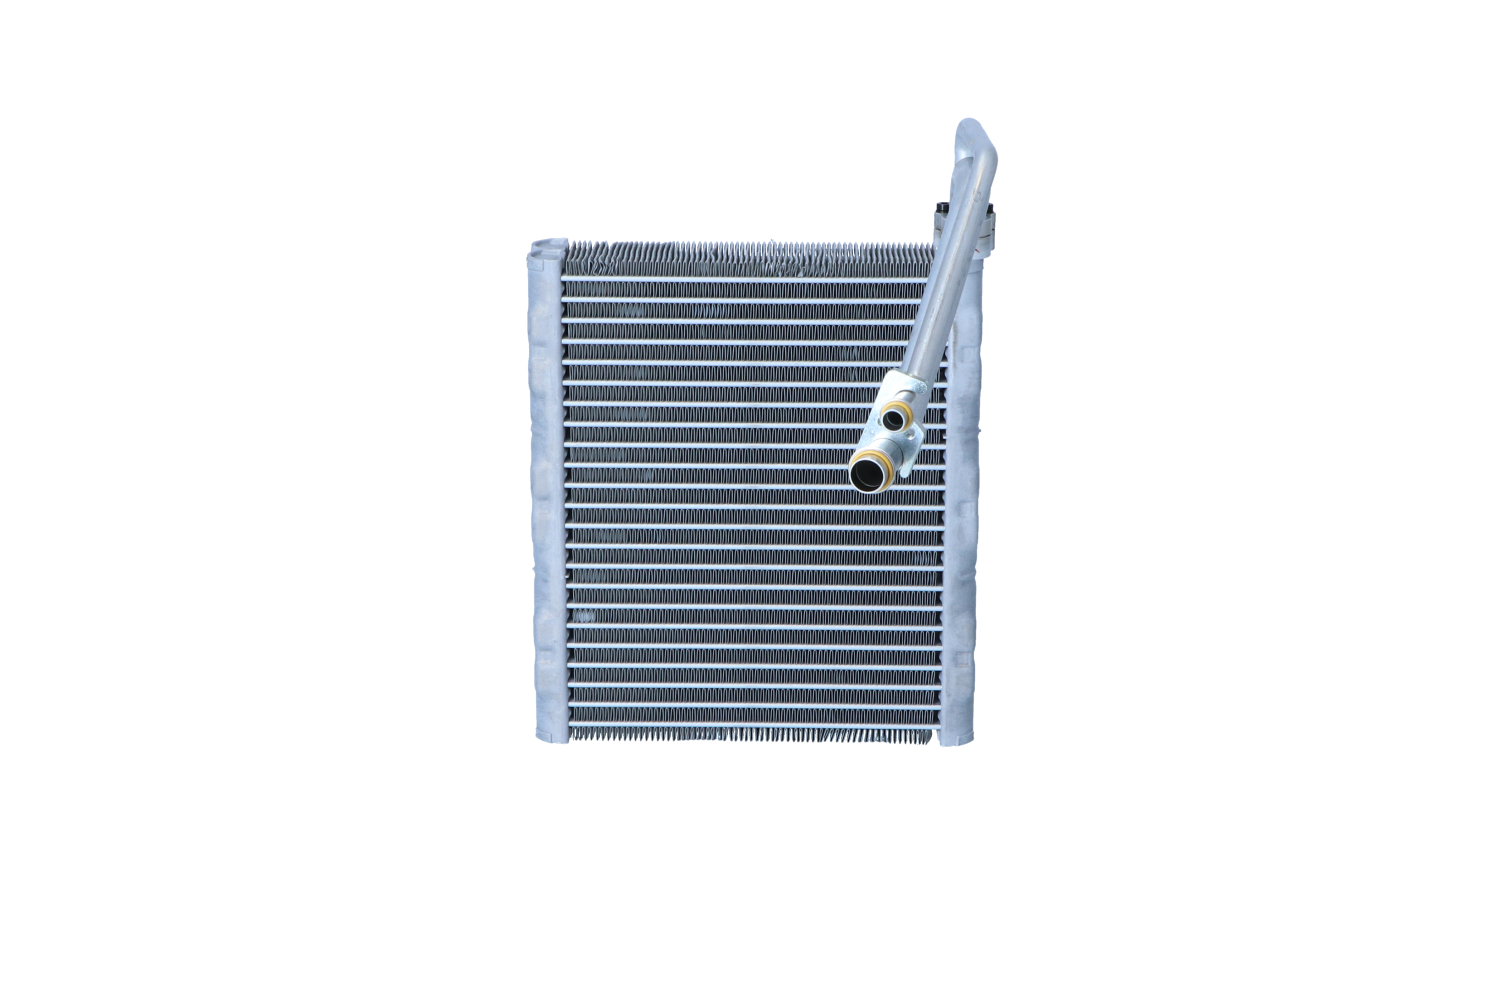 Volvo Air conditioning evaporator NRF 36142 at a good price